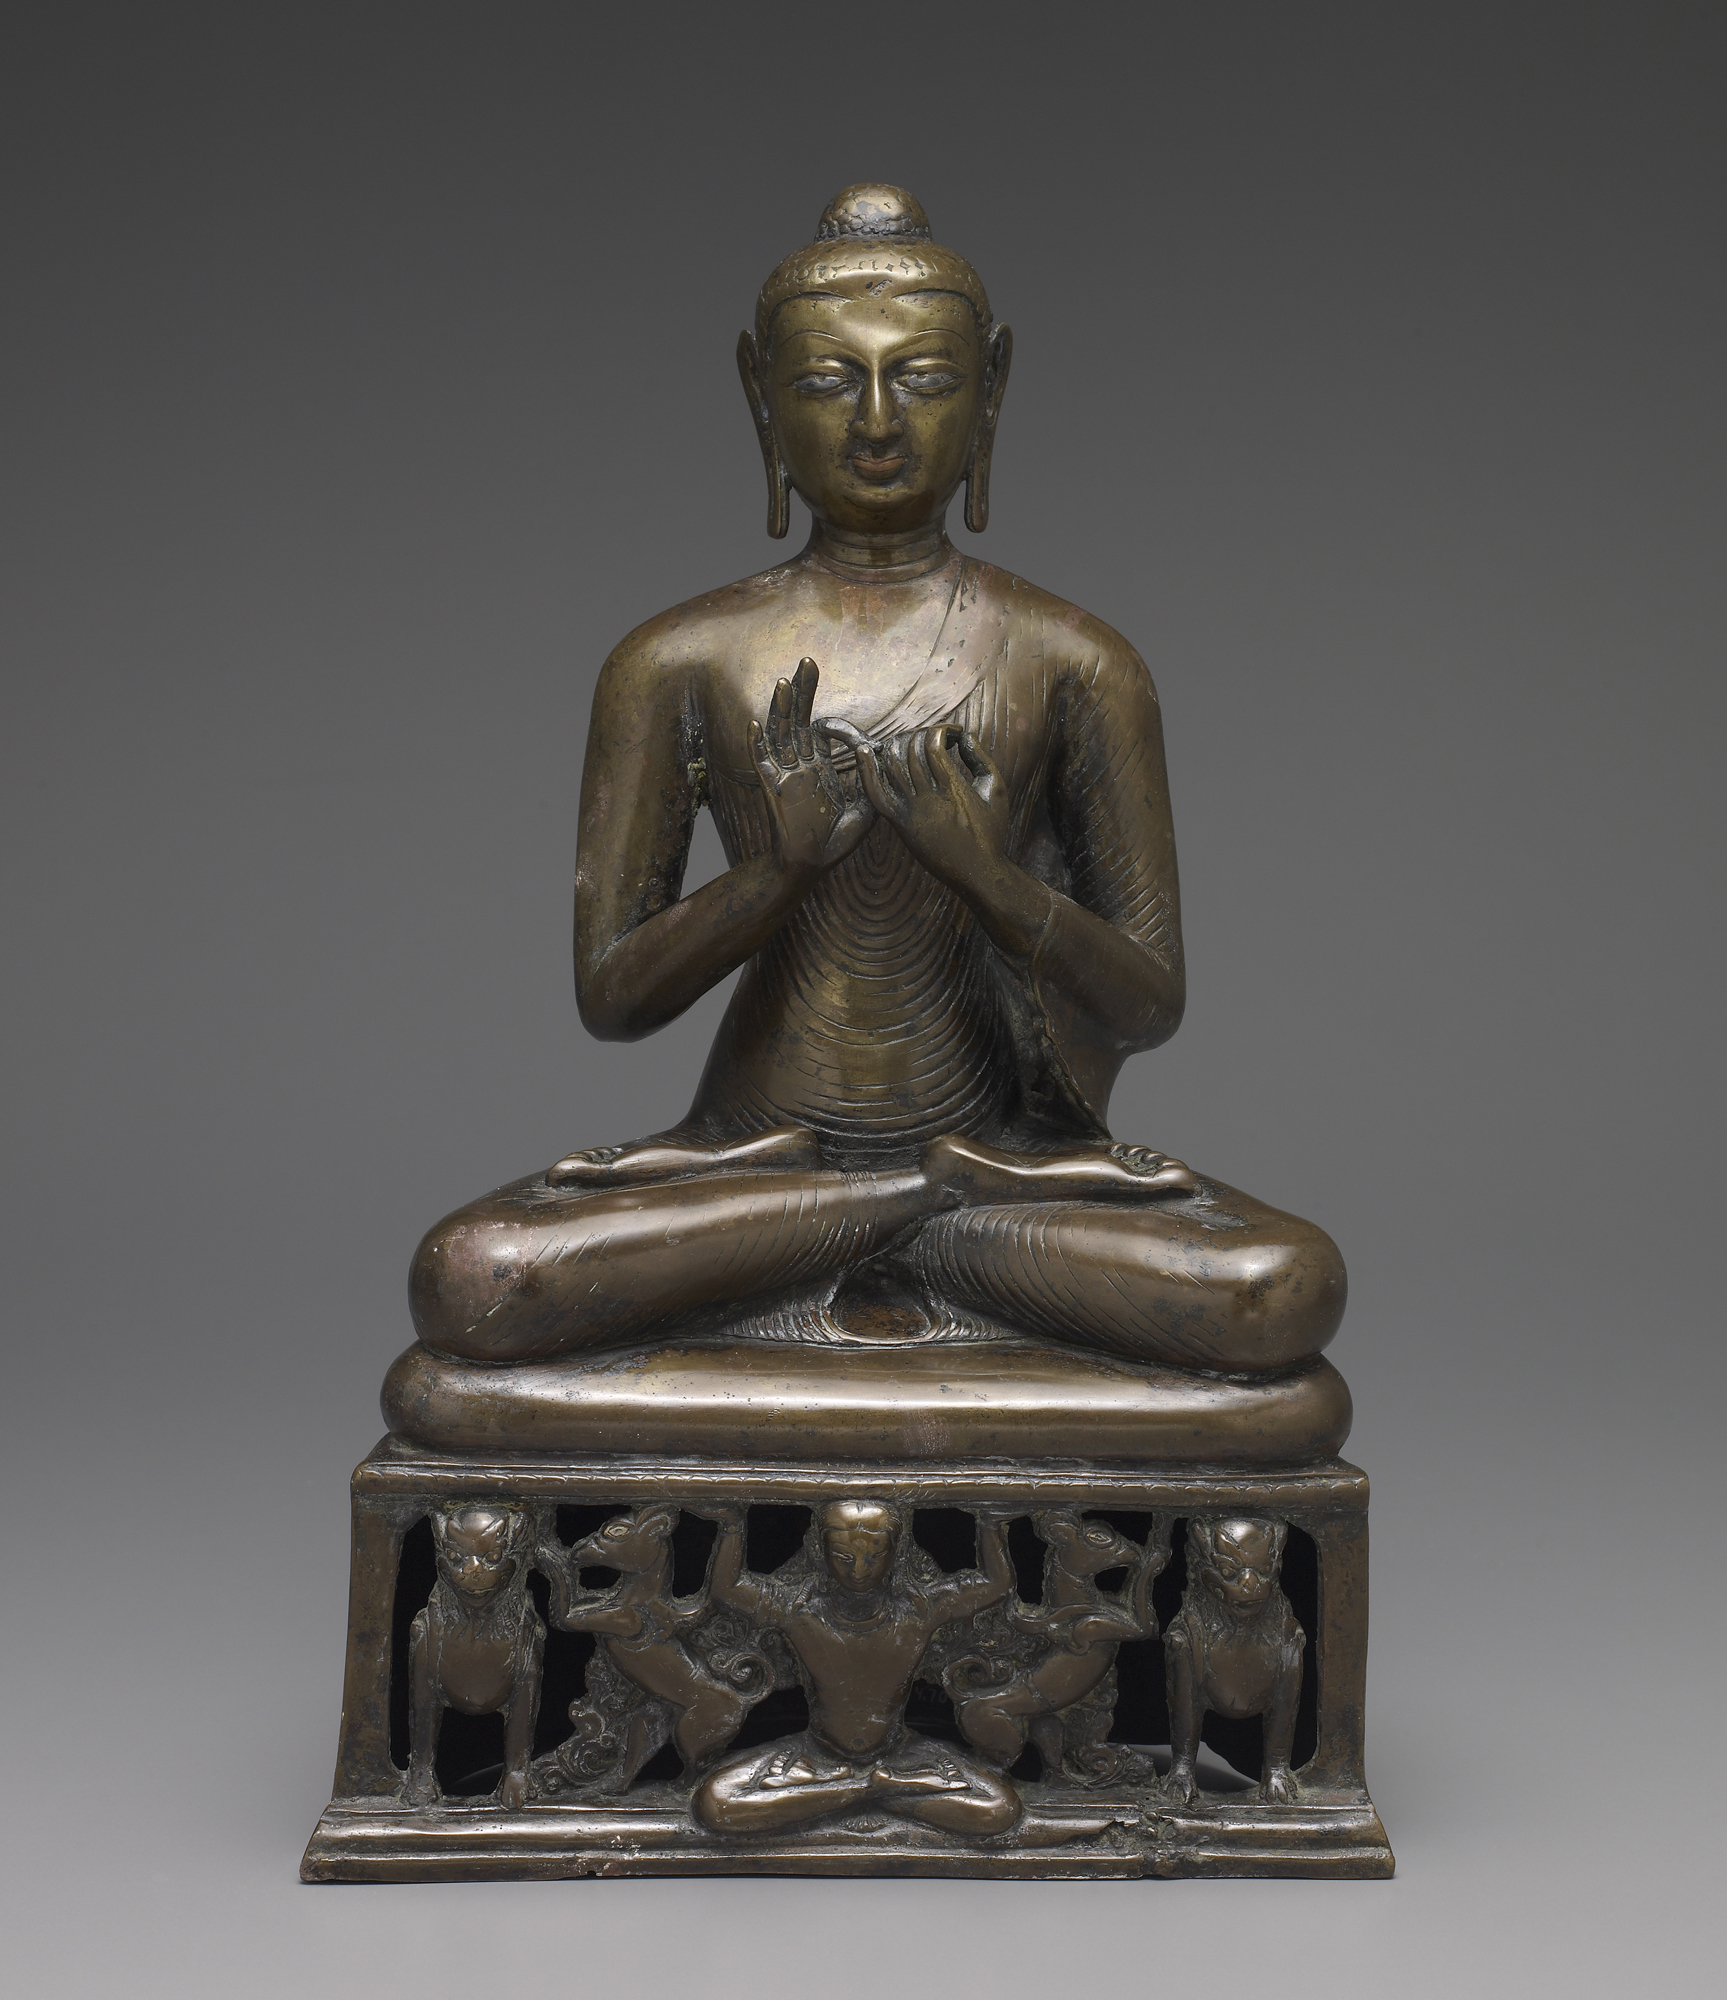 An image of a seated buddha sculpture sitting in Lotus pose